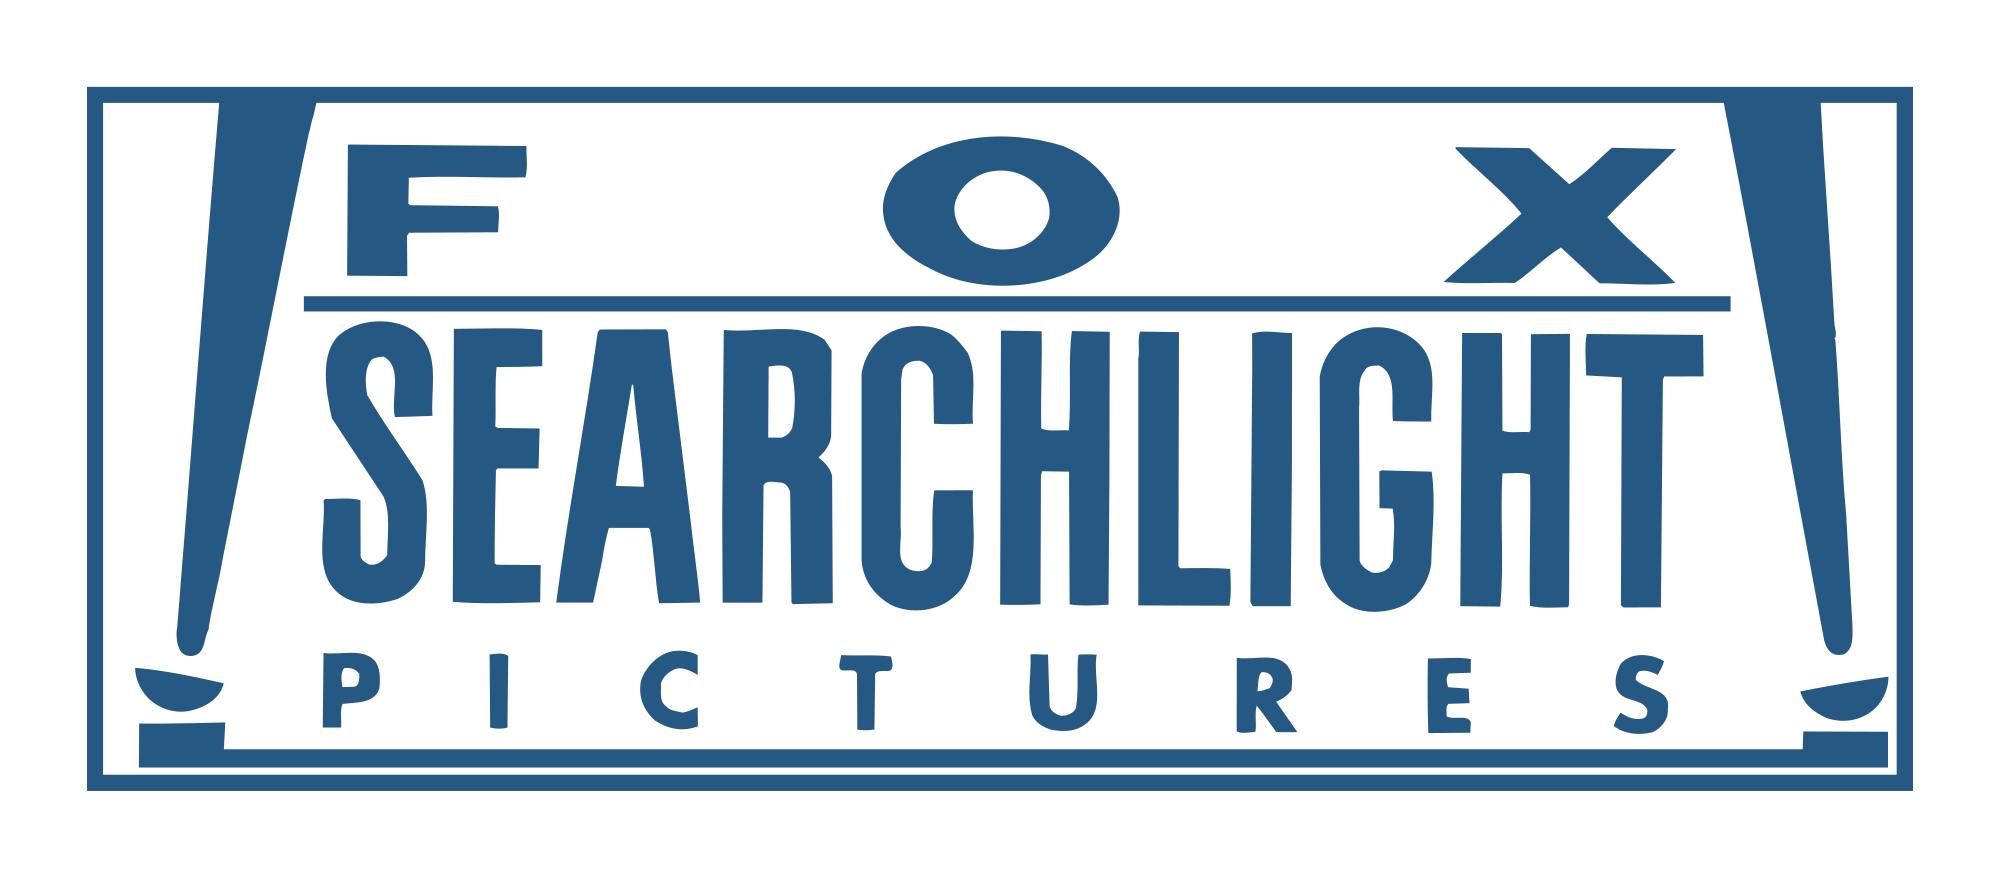 Fox Searchlight Pictures Logo - File:Fox-Searchlight-Pictures-Logo.svg - Wikimedia Commons